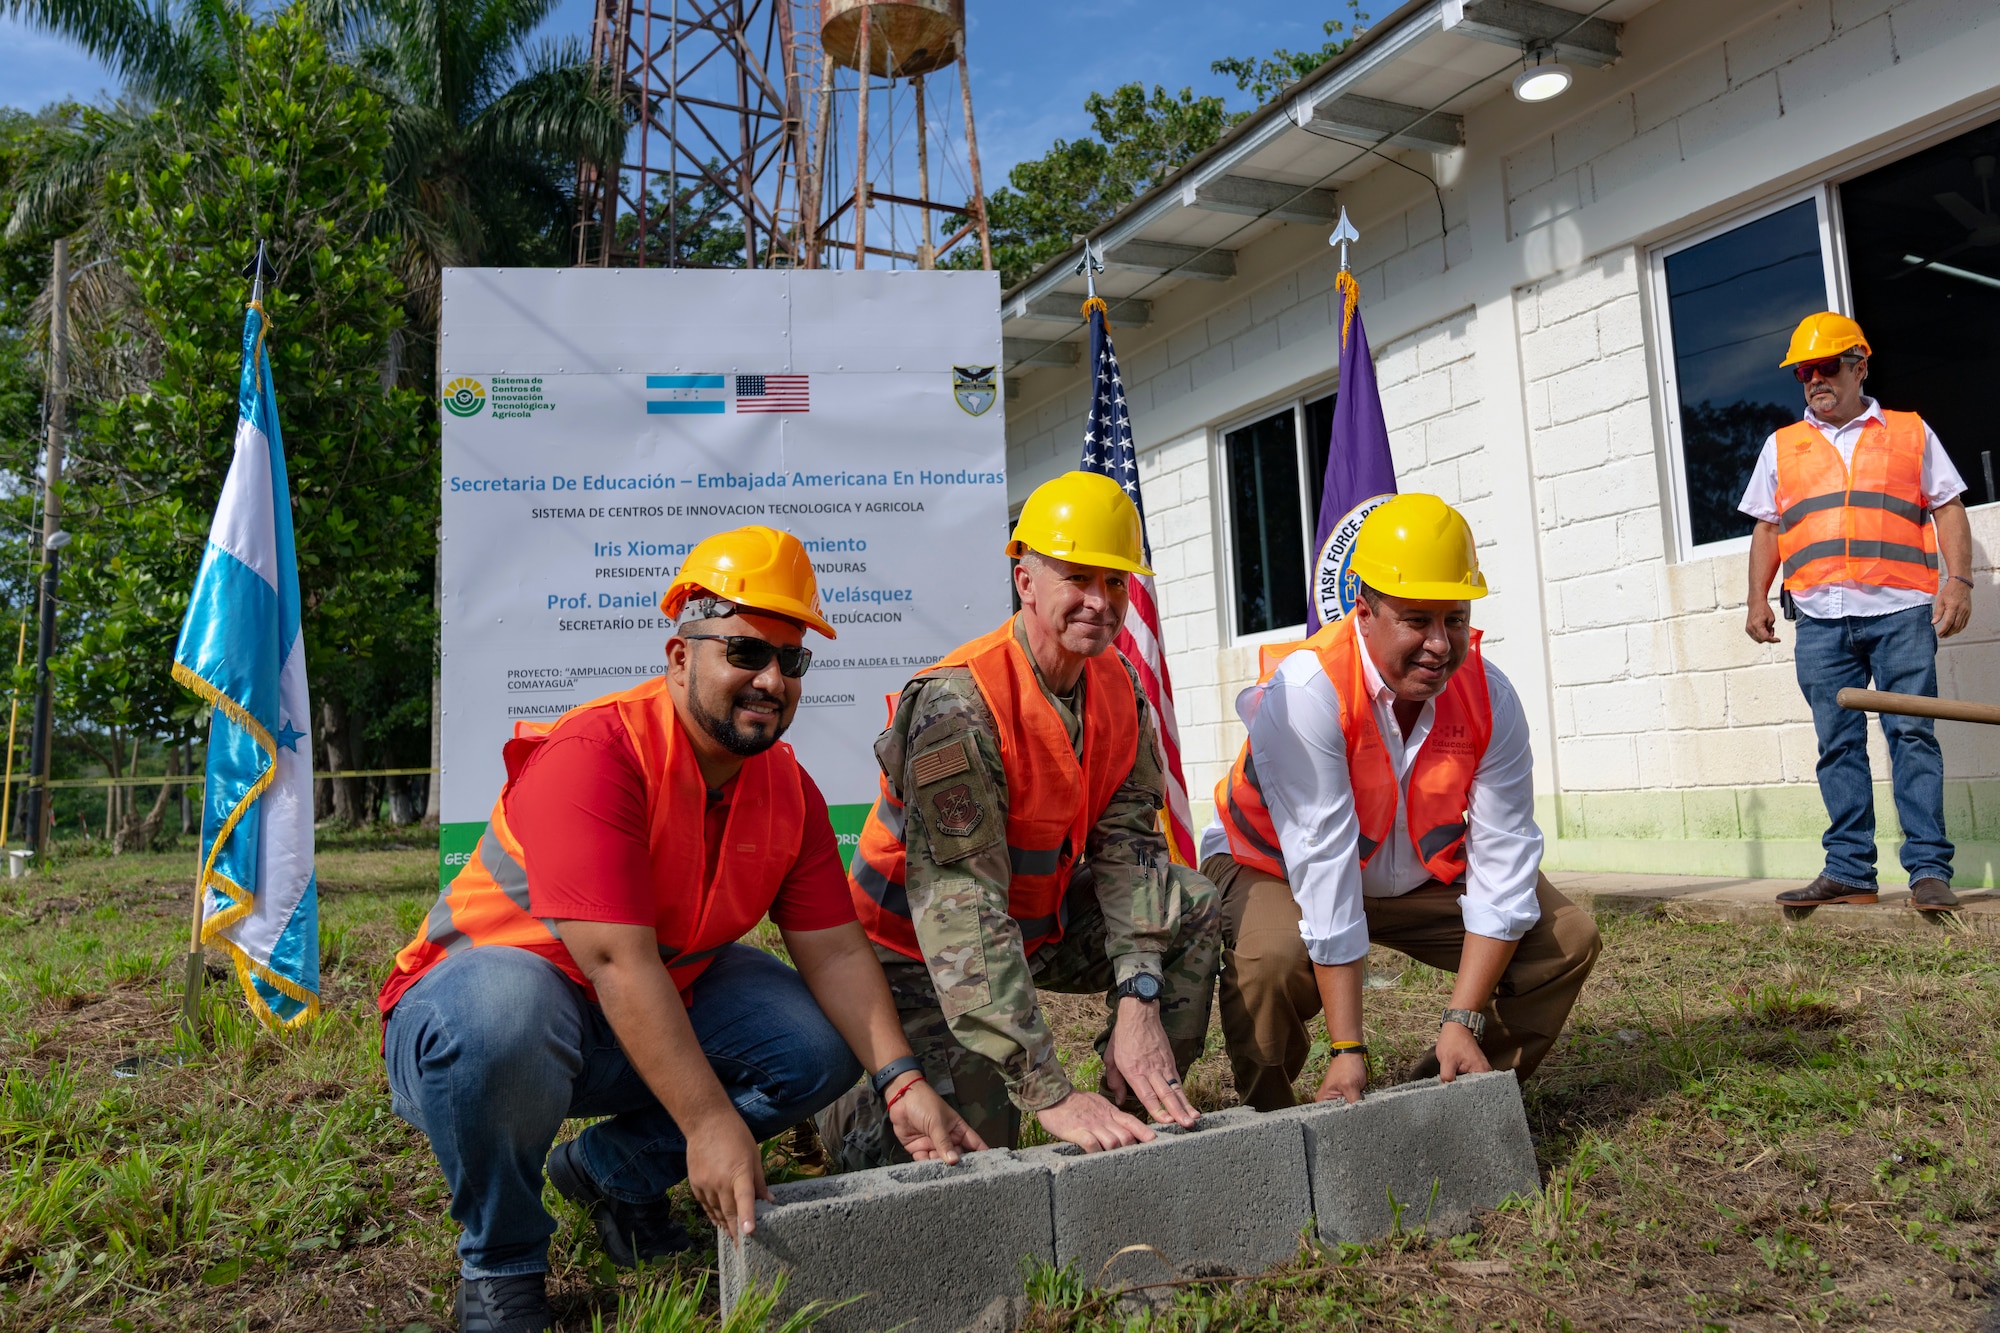 From left to right, Honduras Minister of Education, Professor Daniel Esponda, U.S. Maj. Gen. Evan Pettus, 12th Air Force (Air Forces Southern) commander, and Honduras Deputy Minister of Education for School Construction and Reconstruction, Juan Carlos Coello, participate in a bricklaying ceremony at the System of Technological and Agricultural Innovation (SCITA) in Comayagua, Honduras, Aug. 4, 2023. U.S. Southern Command's Humanitarian Assistance Program donated $25,000 to SCITA for improvements to infrastructure that are key to ensuring quality education for Hondurans. (U.S. Air Force photo by Tech. Sgt. Rachel Maxwell)